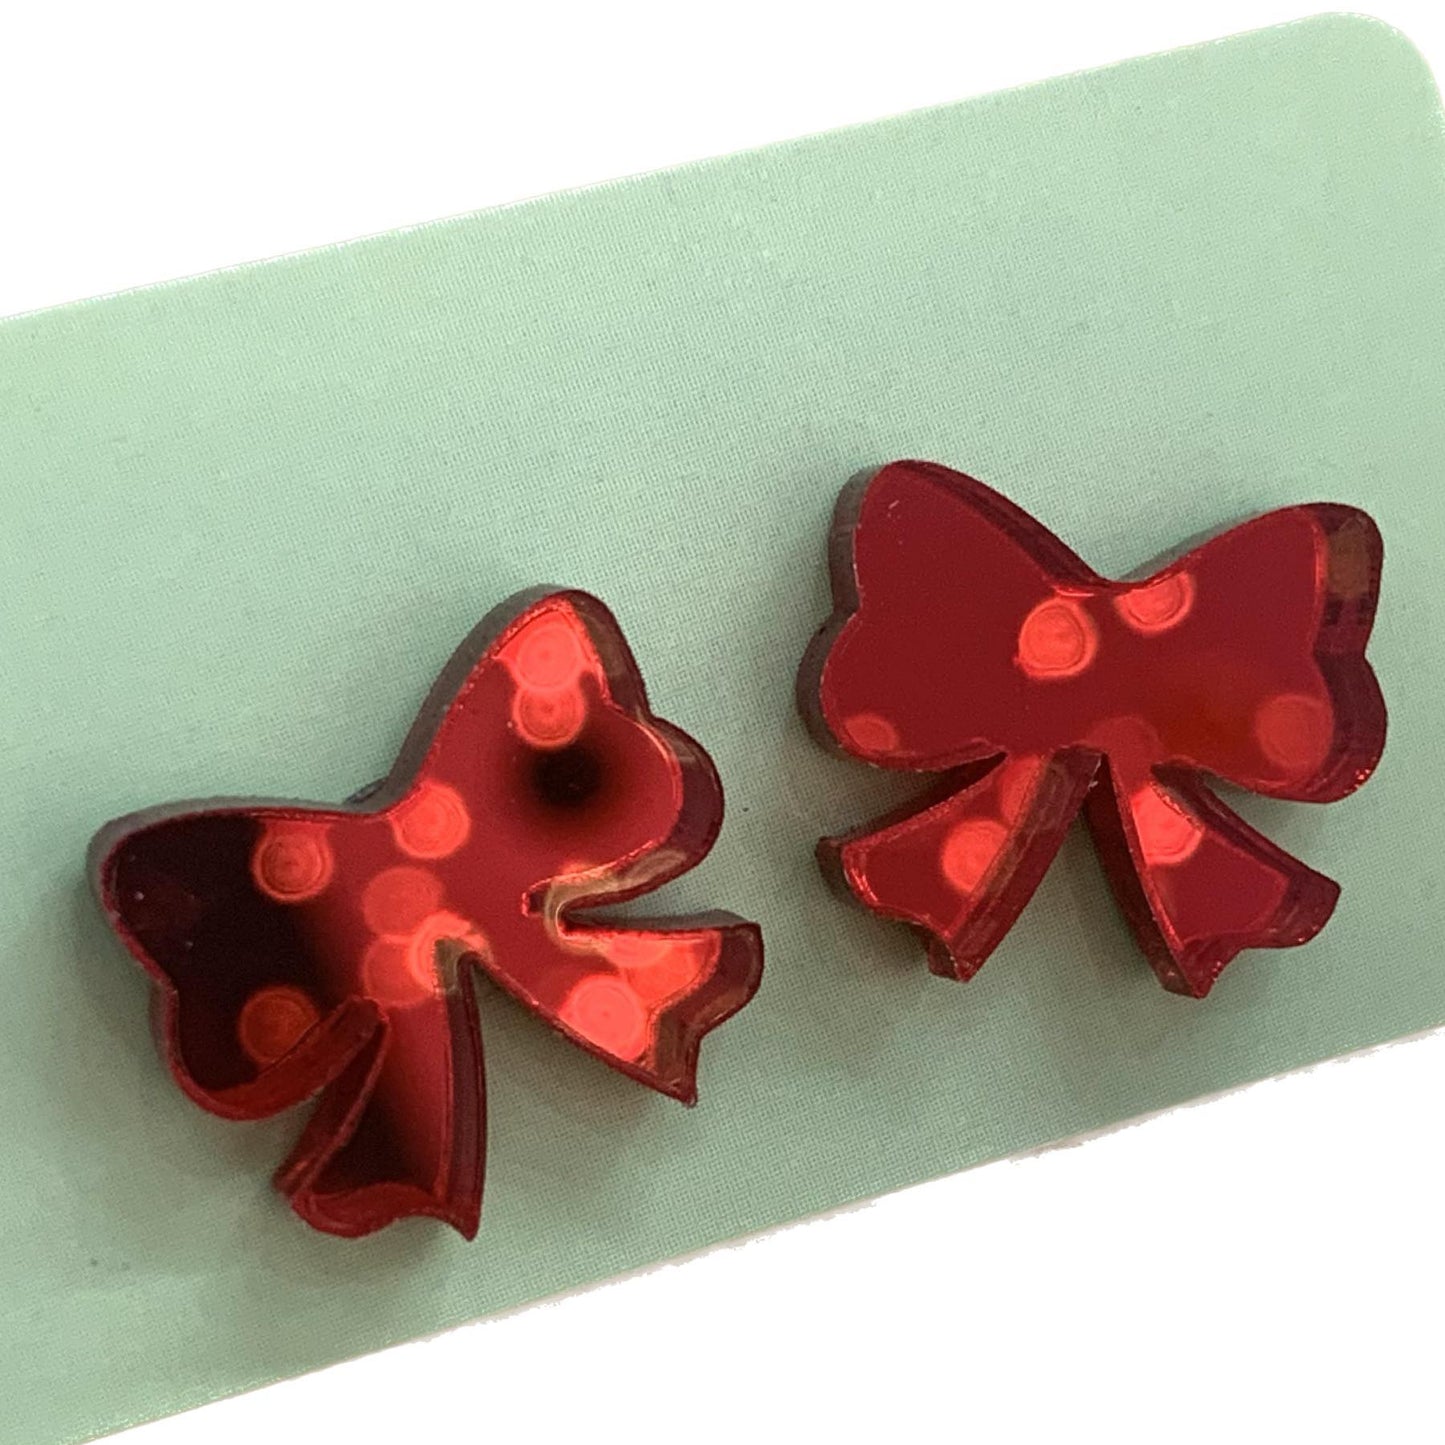 MAKIN' WHOOPEE - Mirror Christmas Bow Studs- Red